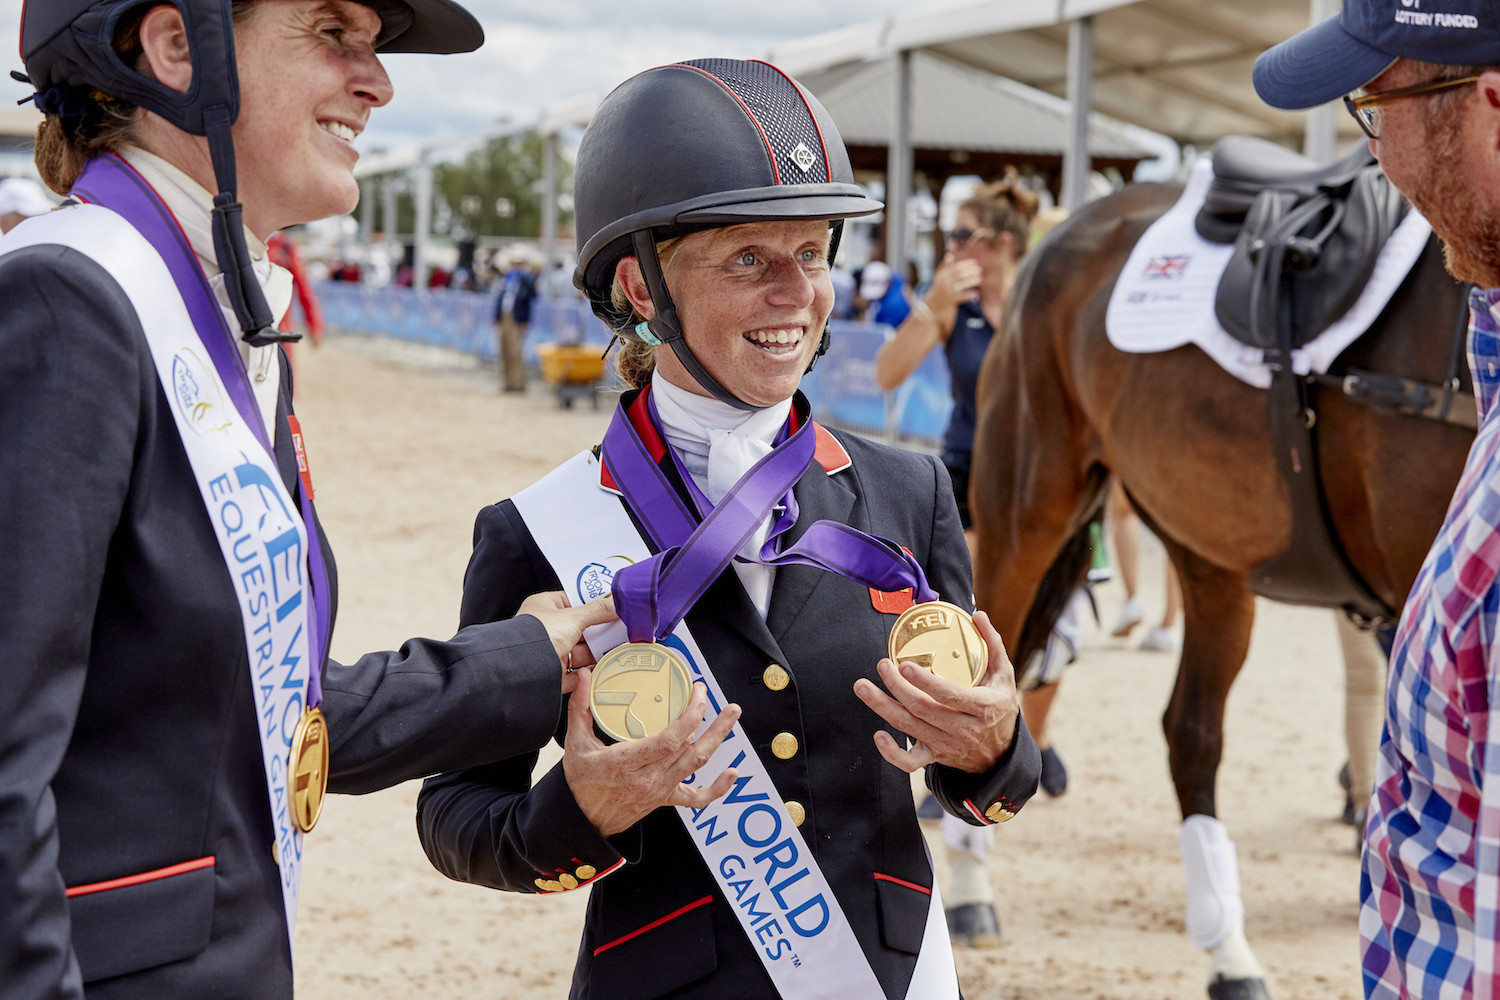 Rosalind Canter won the individual title and helped Britain clinch team gold at the World Equestrian Games in Tyron ©FEI